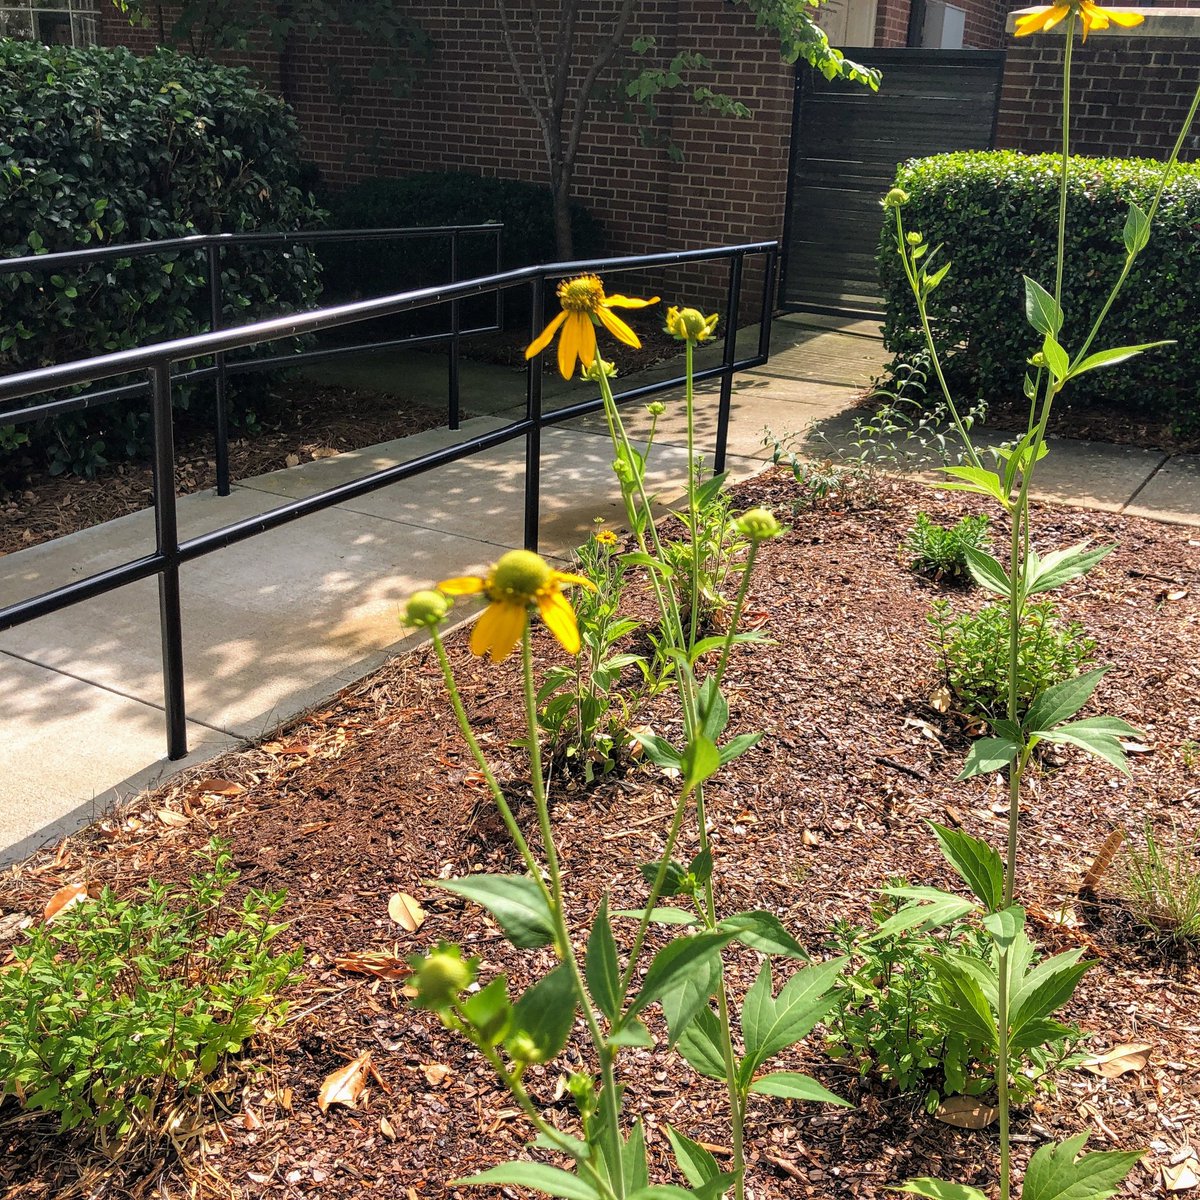 If you're in the Charlotte NC area and studying botany / horticulture, consider using a public library learning garden for  a project in xeriscaping,  sustainable gardening and creating biodiversity. 
DM for more information. 
#BlackBotanistsWeek2022 
#BlackBotanistsRollCall